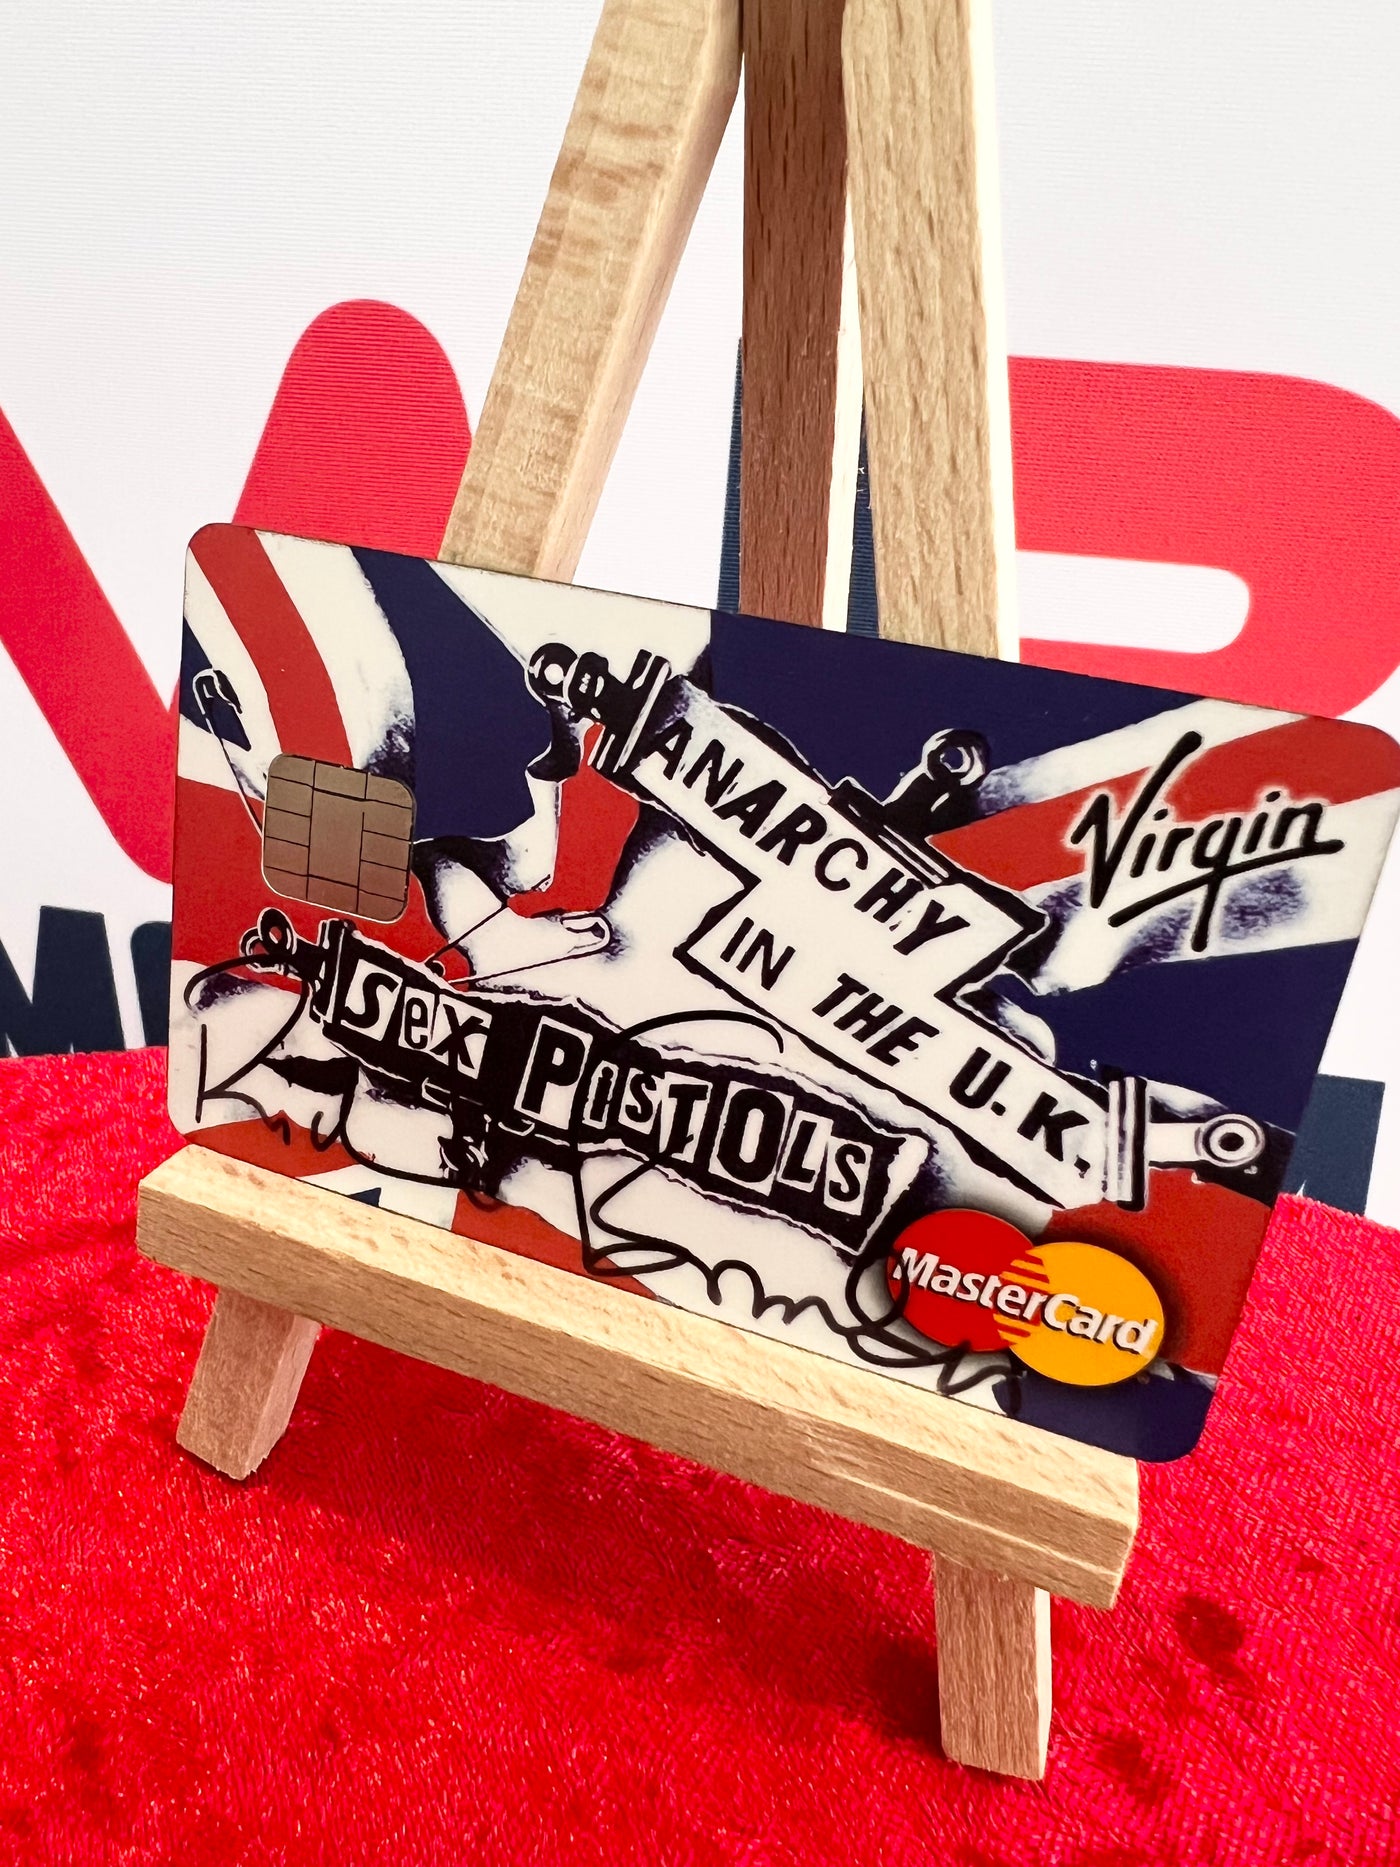 Richard Branson Signed Credit Card  RARE Exclusive One-of-a-Kind Fully Authenticated